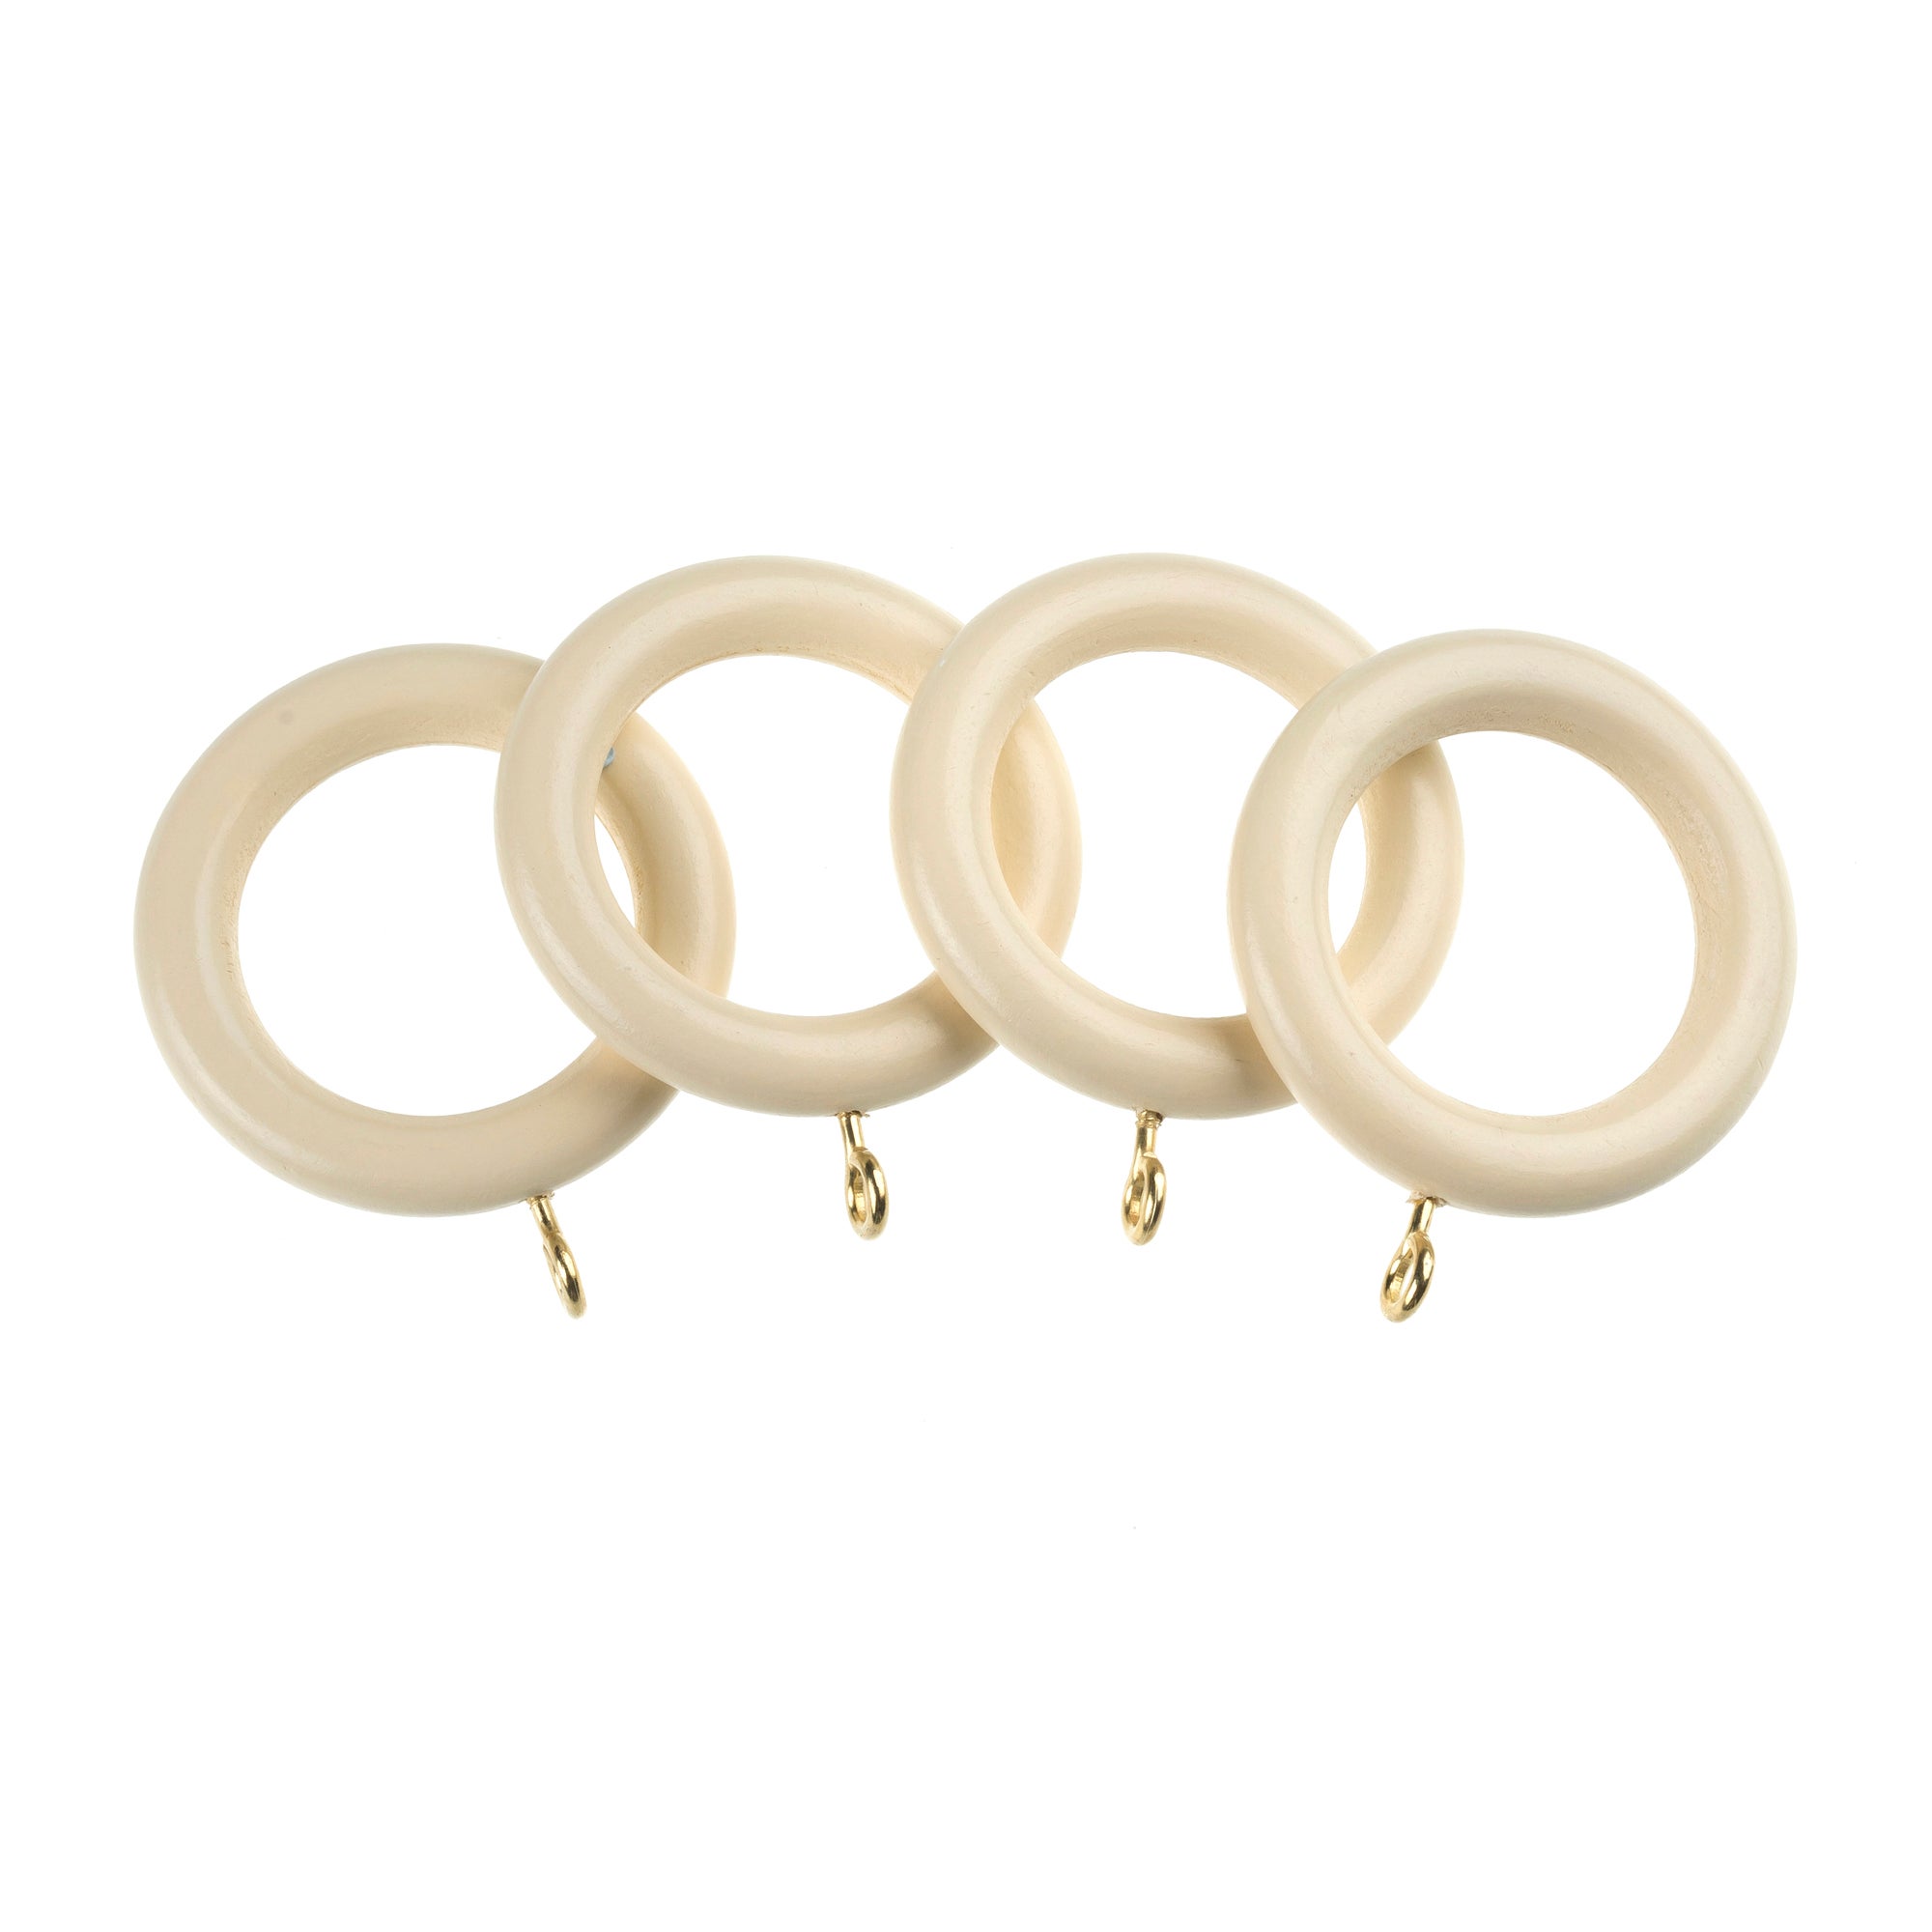 Universal Pack of 4 35mm Cream Curtain Rings